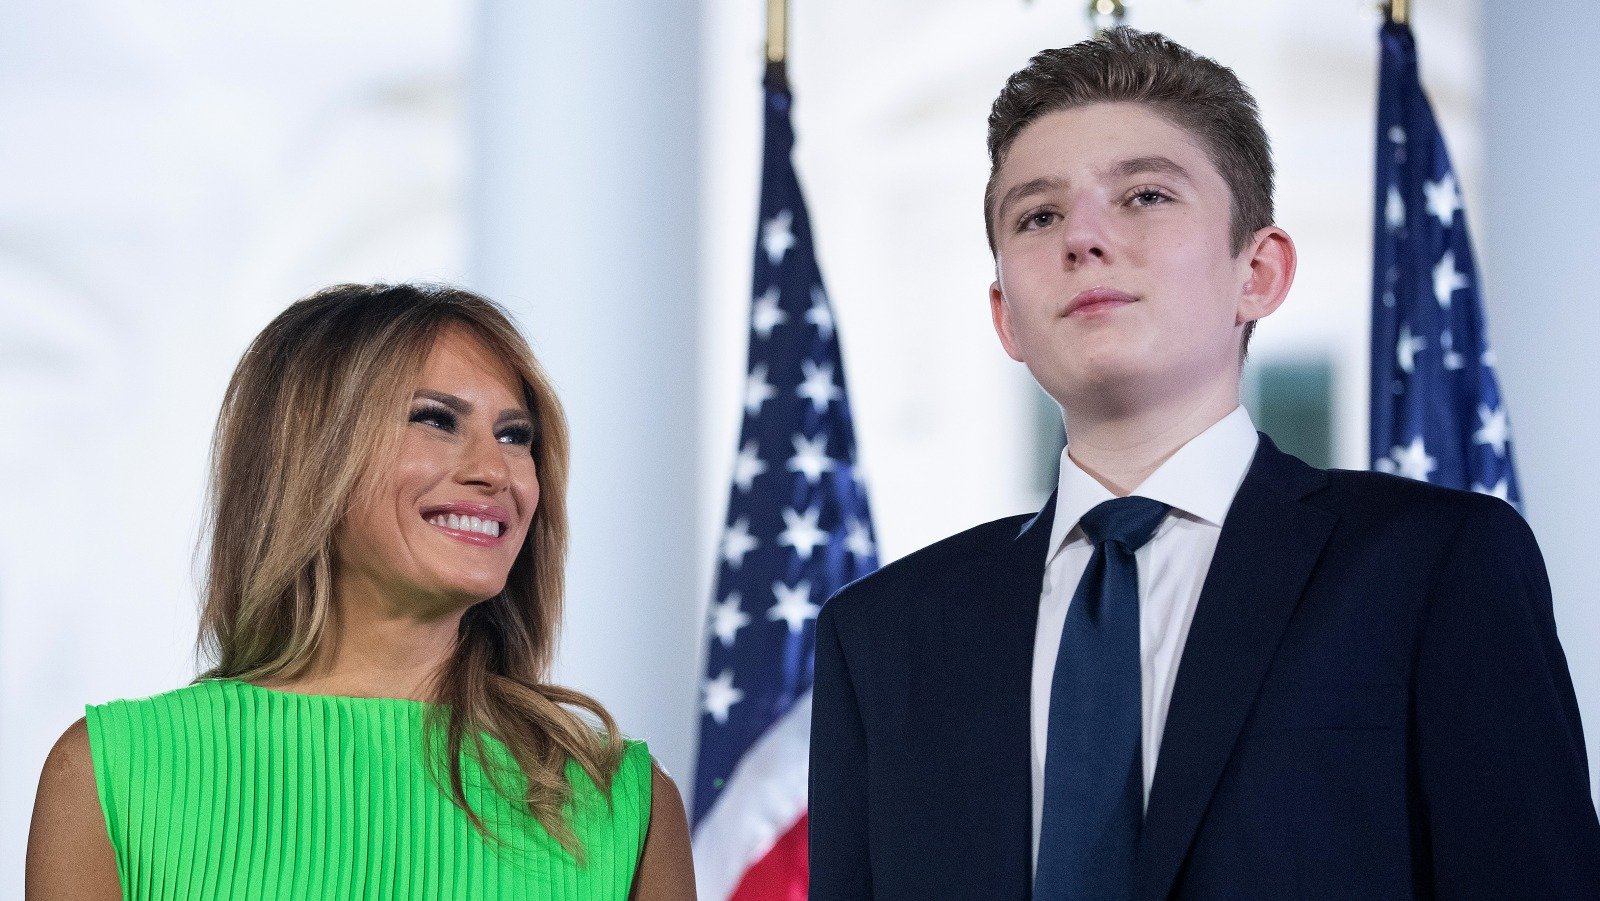 What's Really Going On With Melania And Barron Trump?